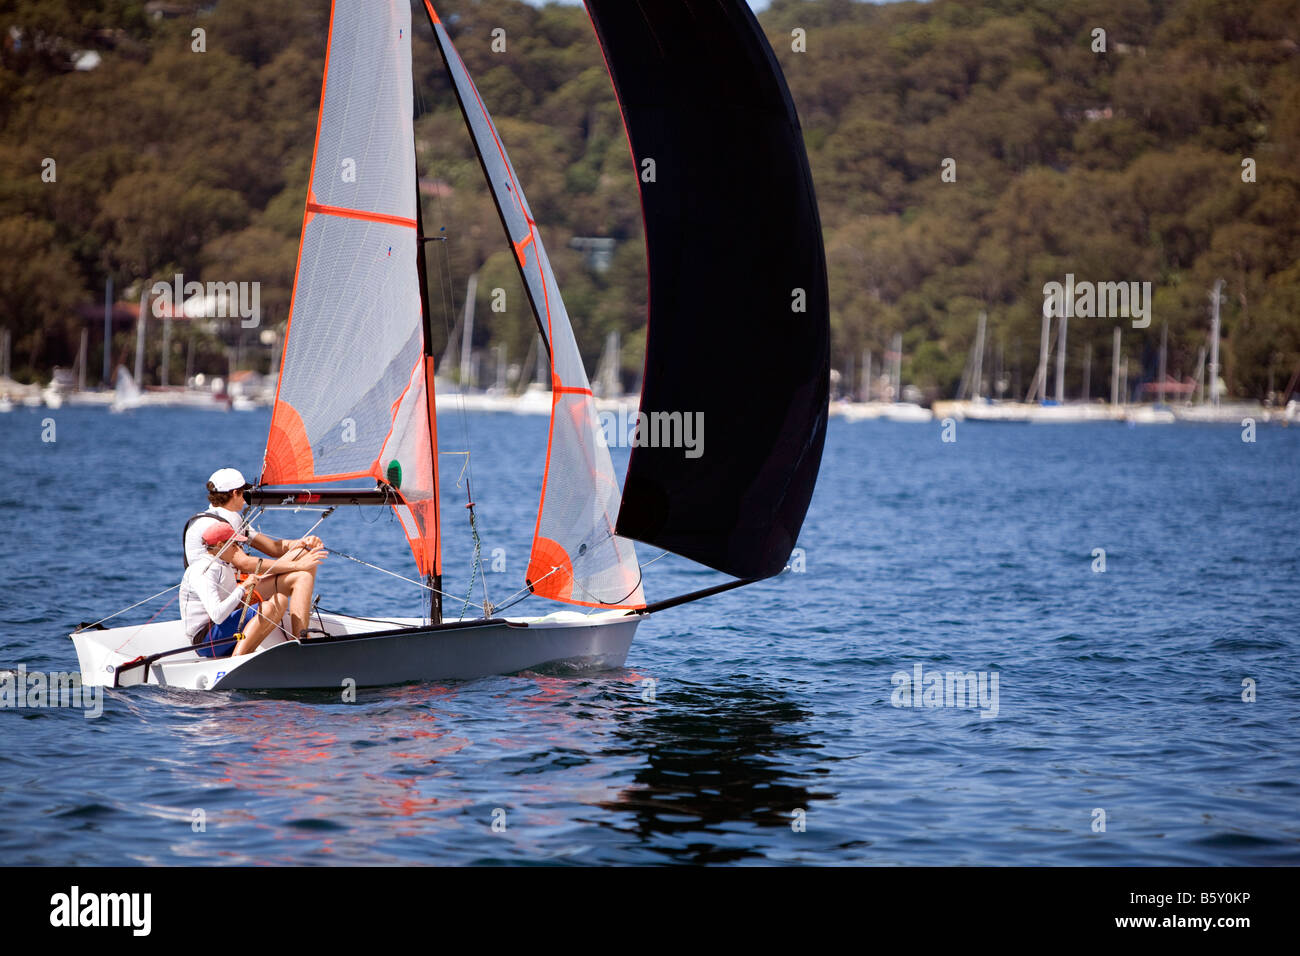 two sailors on the water in their dinghy sailing boat Stock Photo